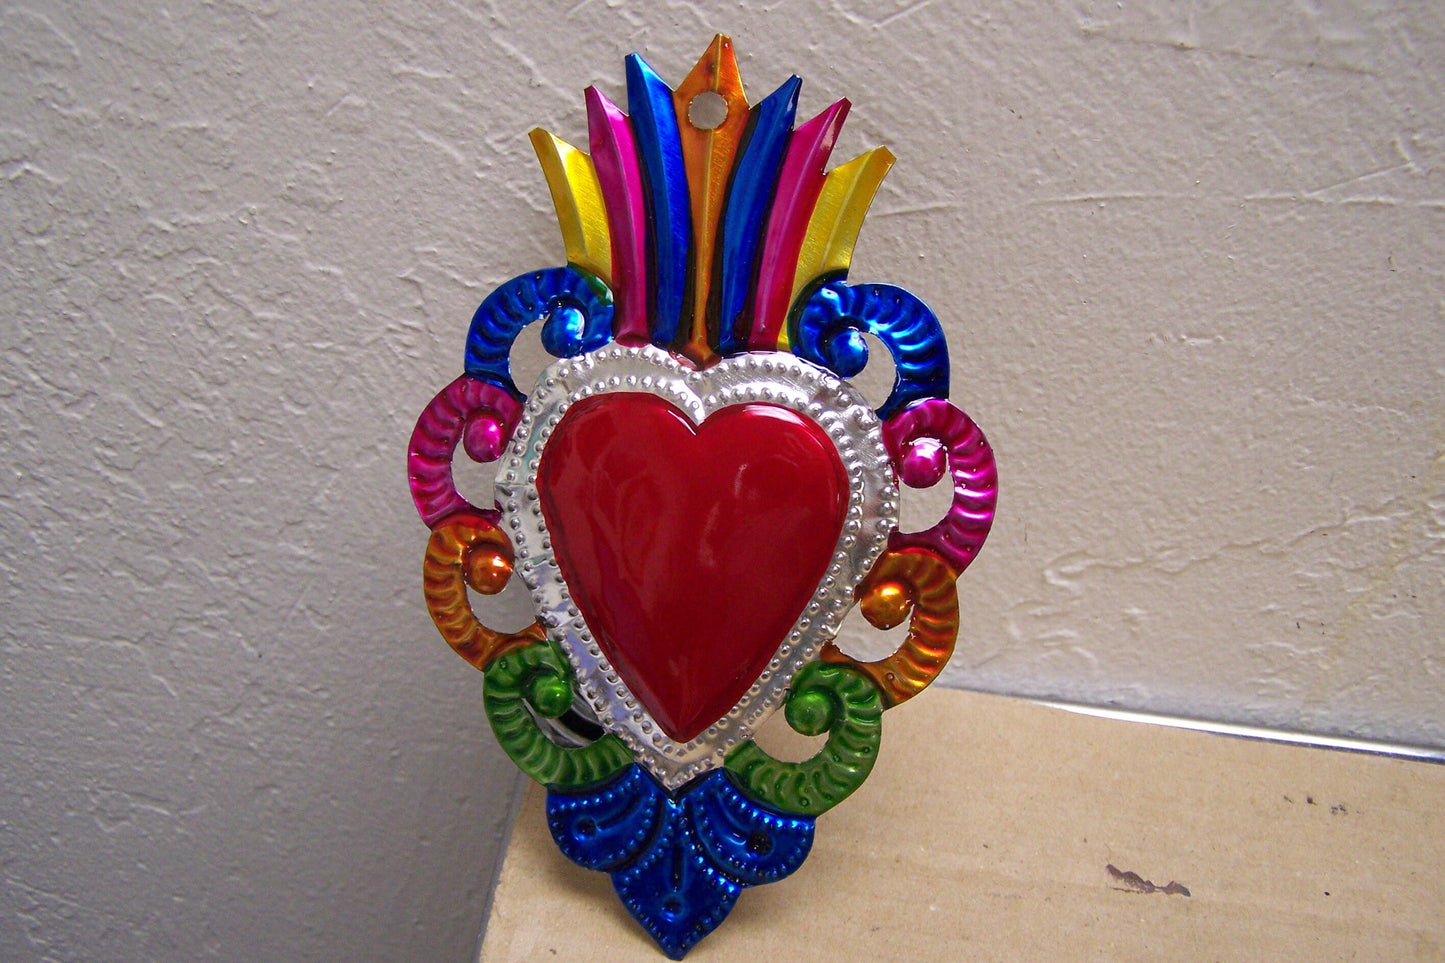 Large Colorful Painted Sacred Heart Milagro Ex Voto - Multicolored - Mexico